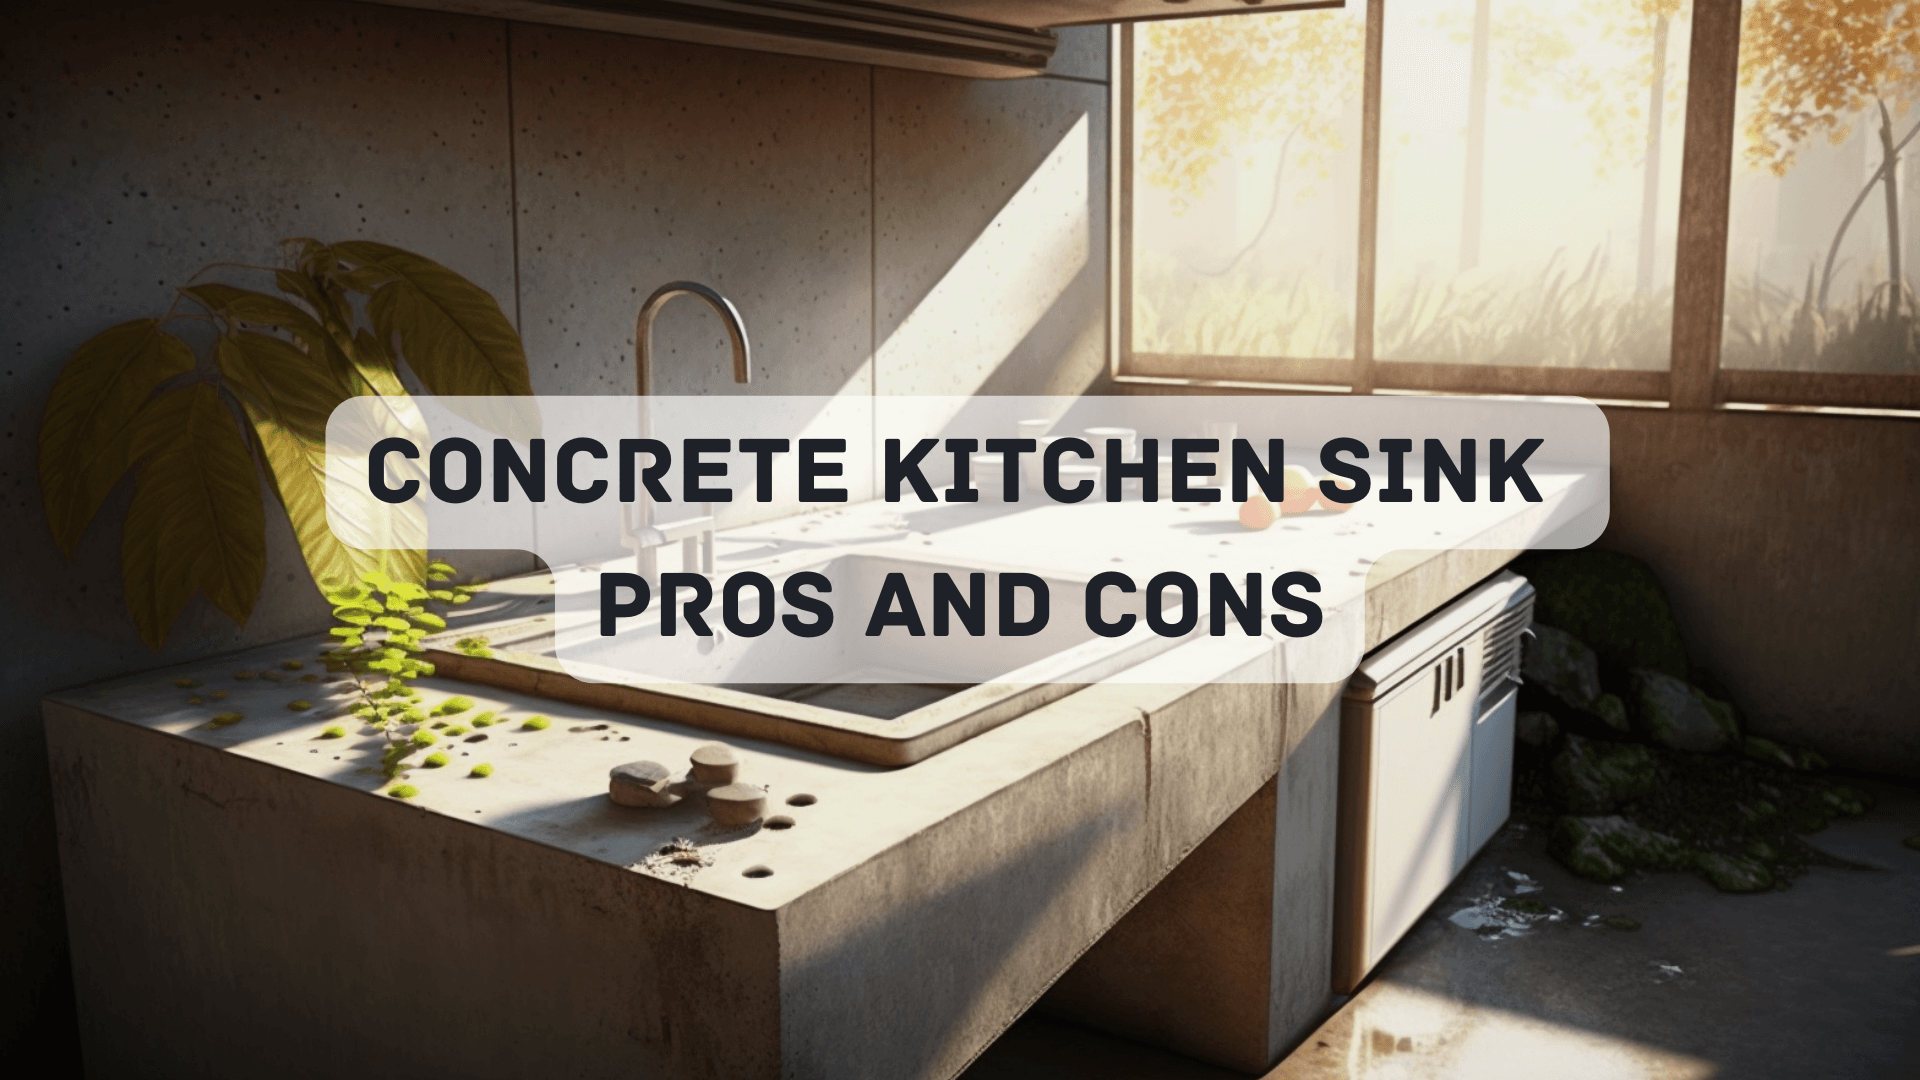 Concrete Kitchen Sink Pros and Cons